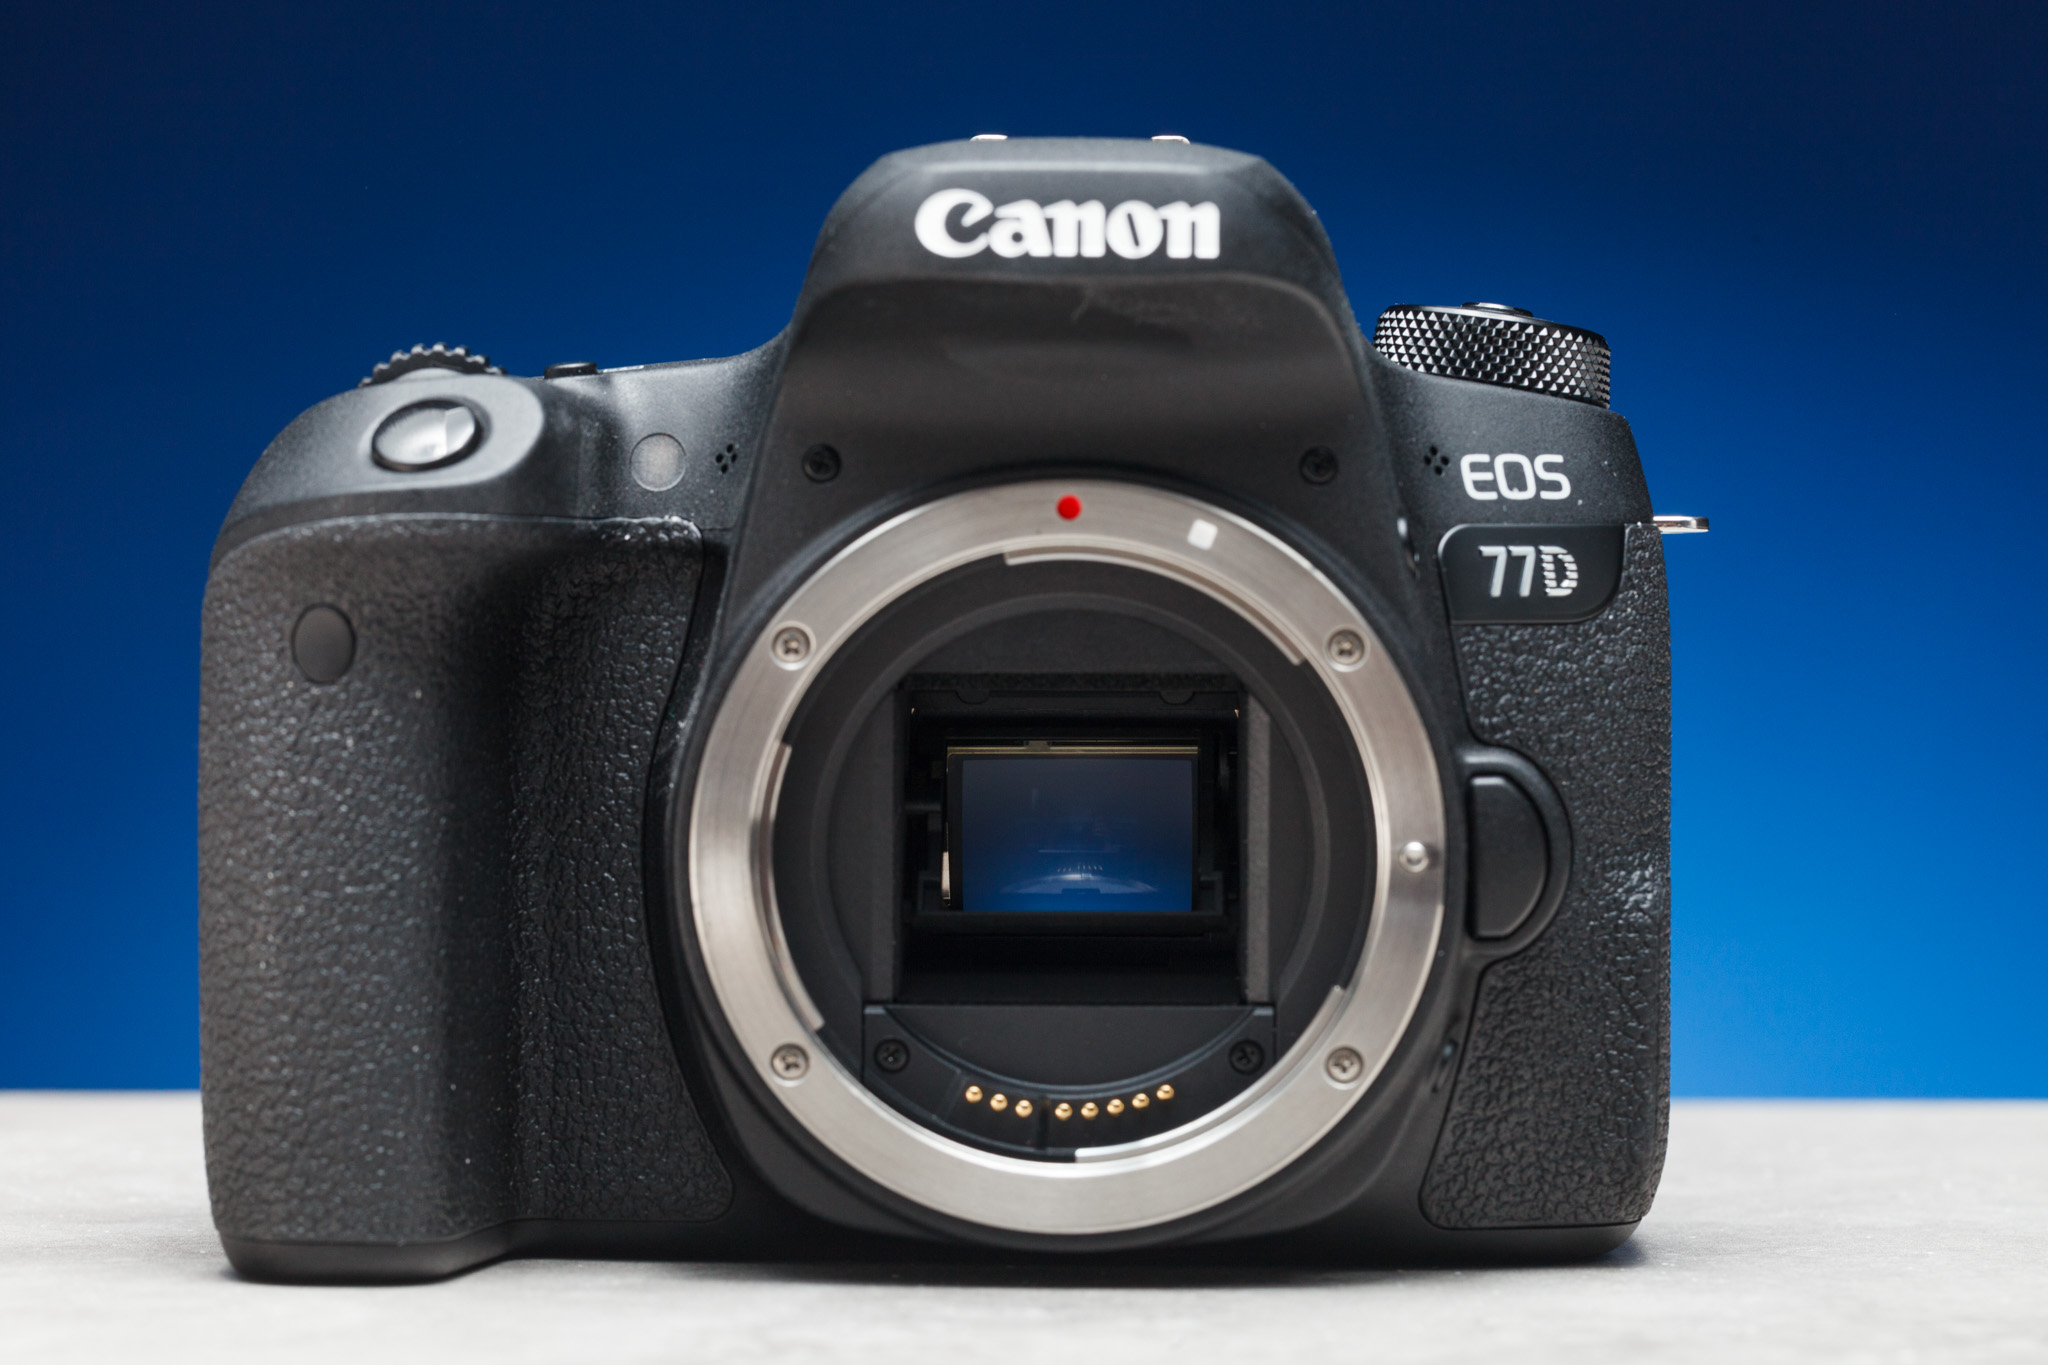 Canon 77D Review | A Solid Beginner’s Camera Offering Room To Grow & Some New Canon Tech